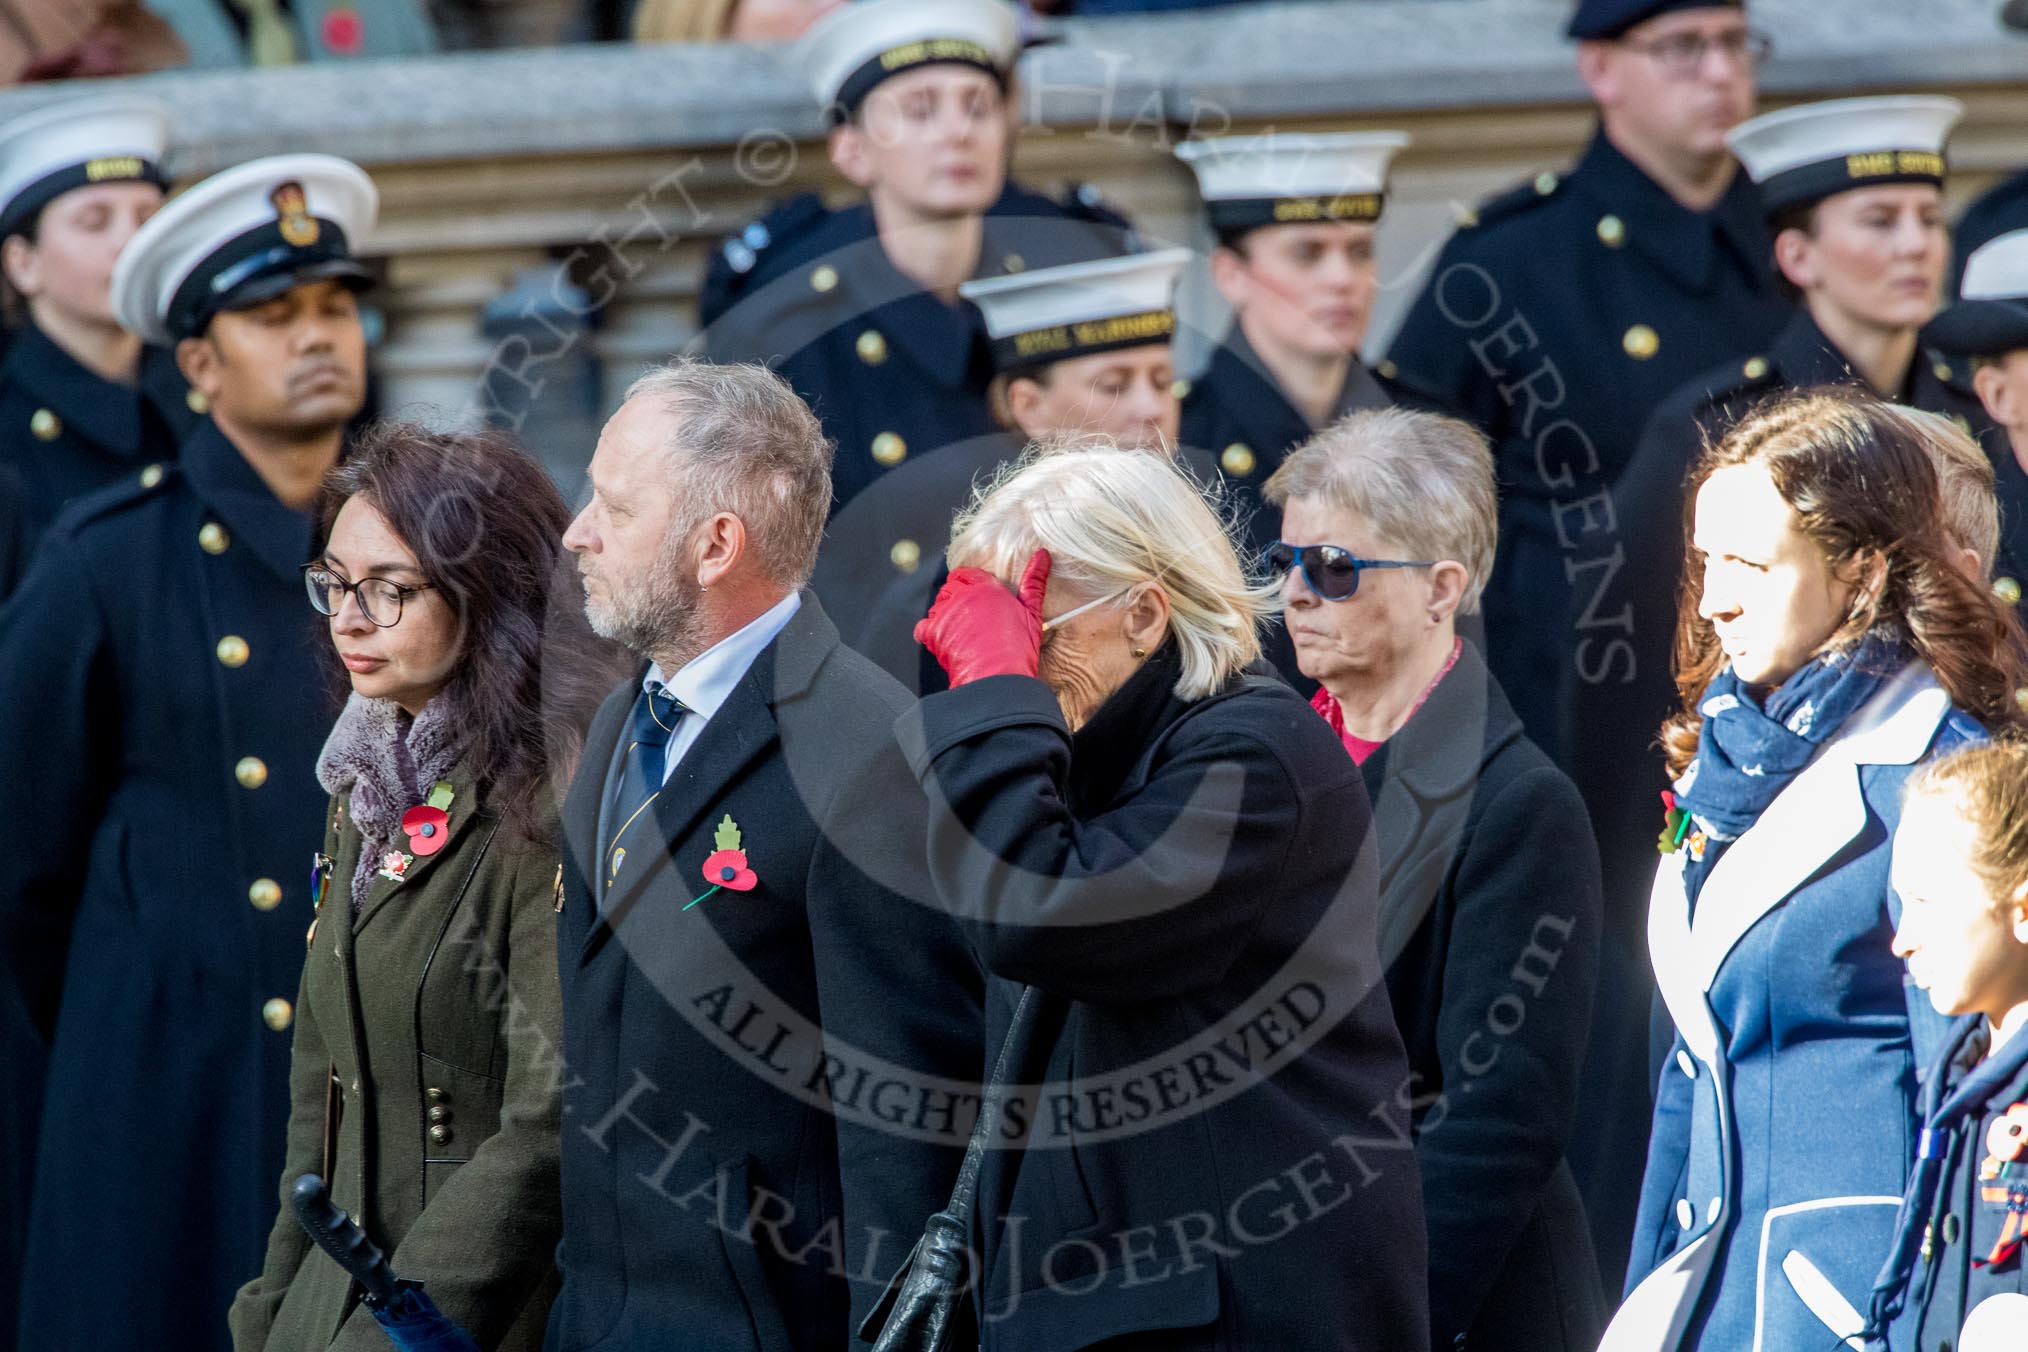 Shot at Dawn Pardons Campaign (Group M28, 24 members) during the Royal British Legion March Past on Remembrance Sunday at the Cenotaph, Whitehall, Westminster, London, 11 November 2018, 12:28.